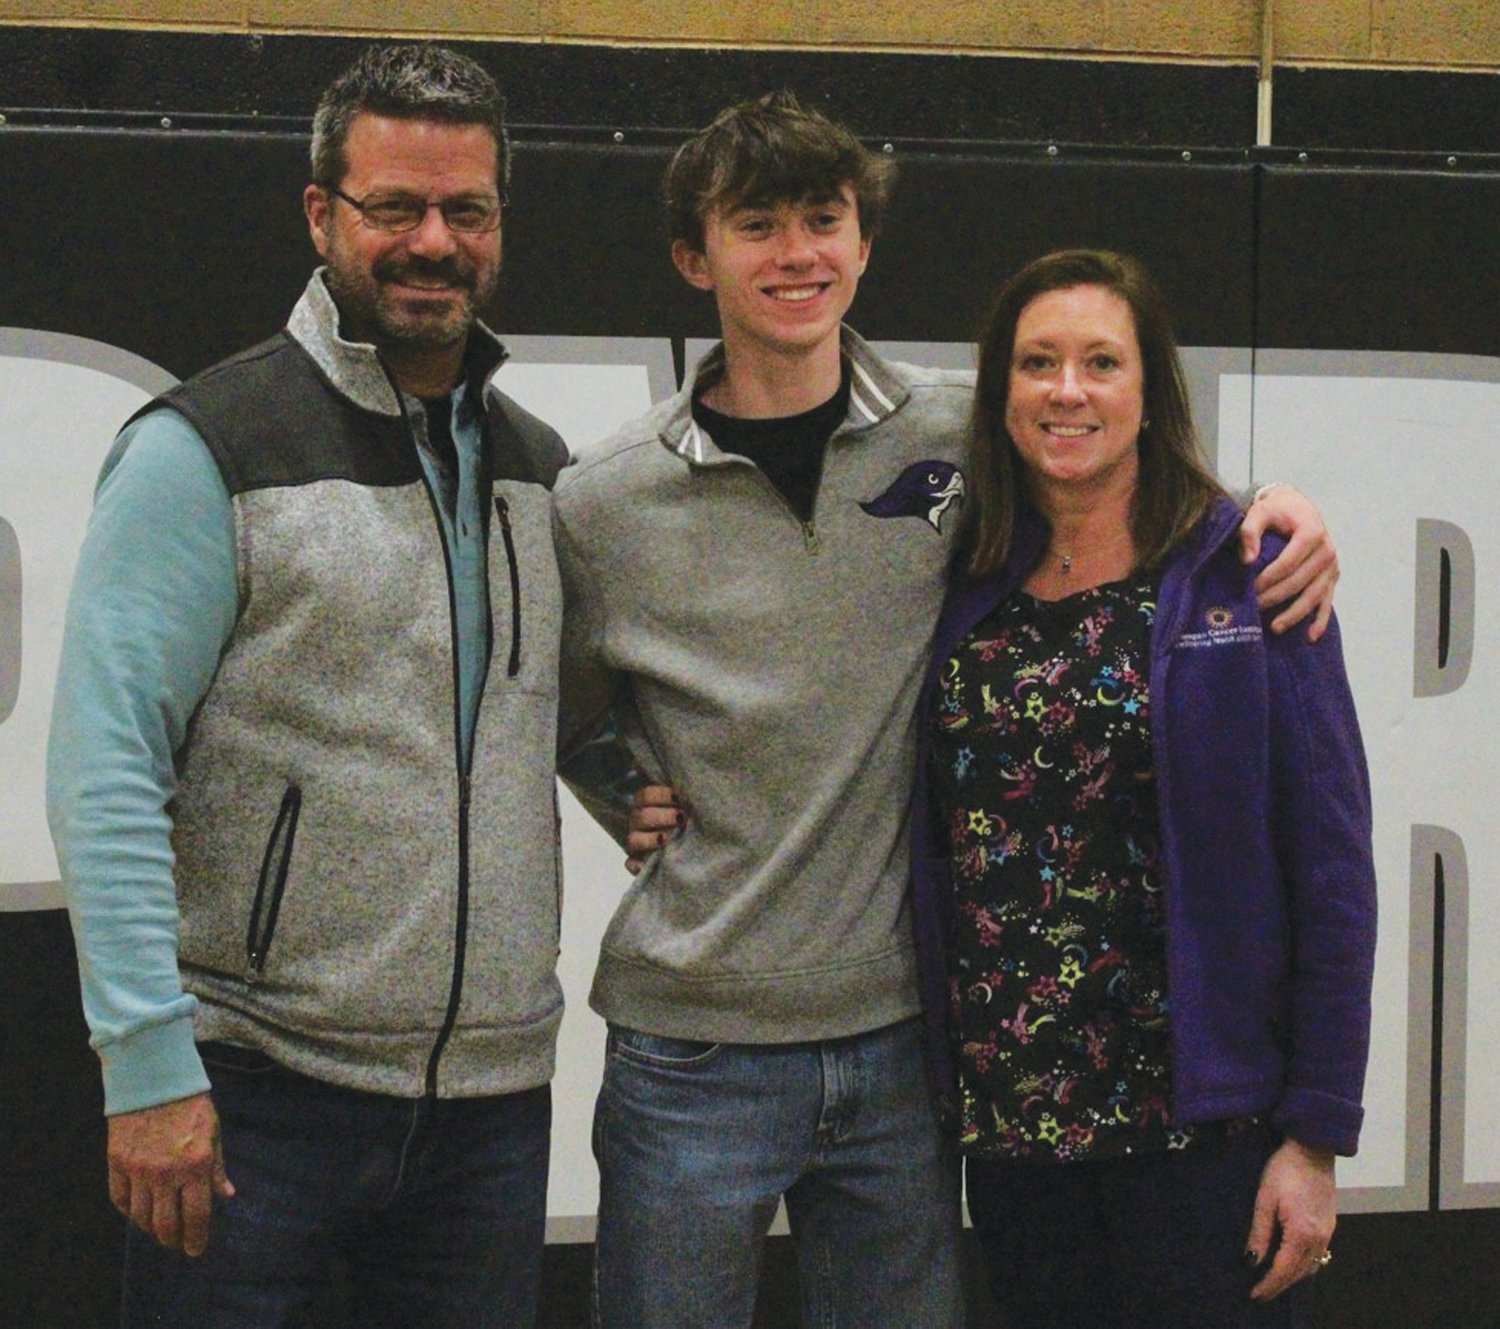 MAKING IT OFFICIAL: Ian Bubar is joined by his family to sign his NLI.